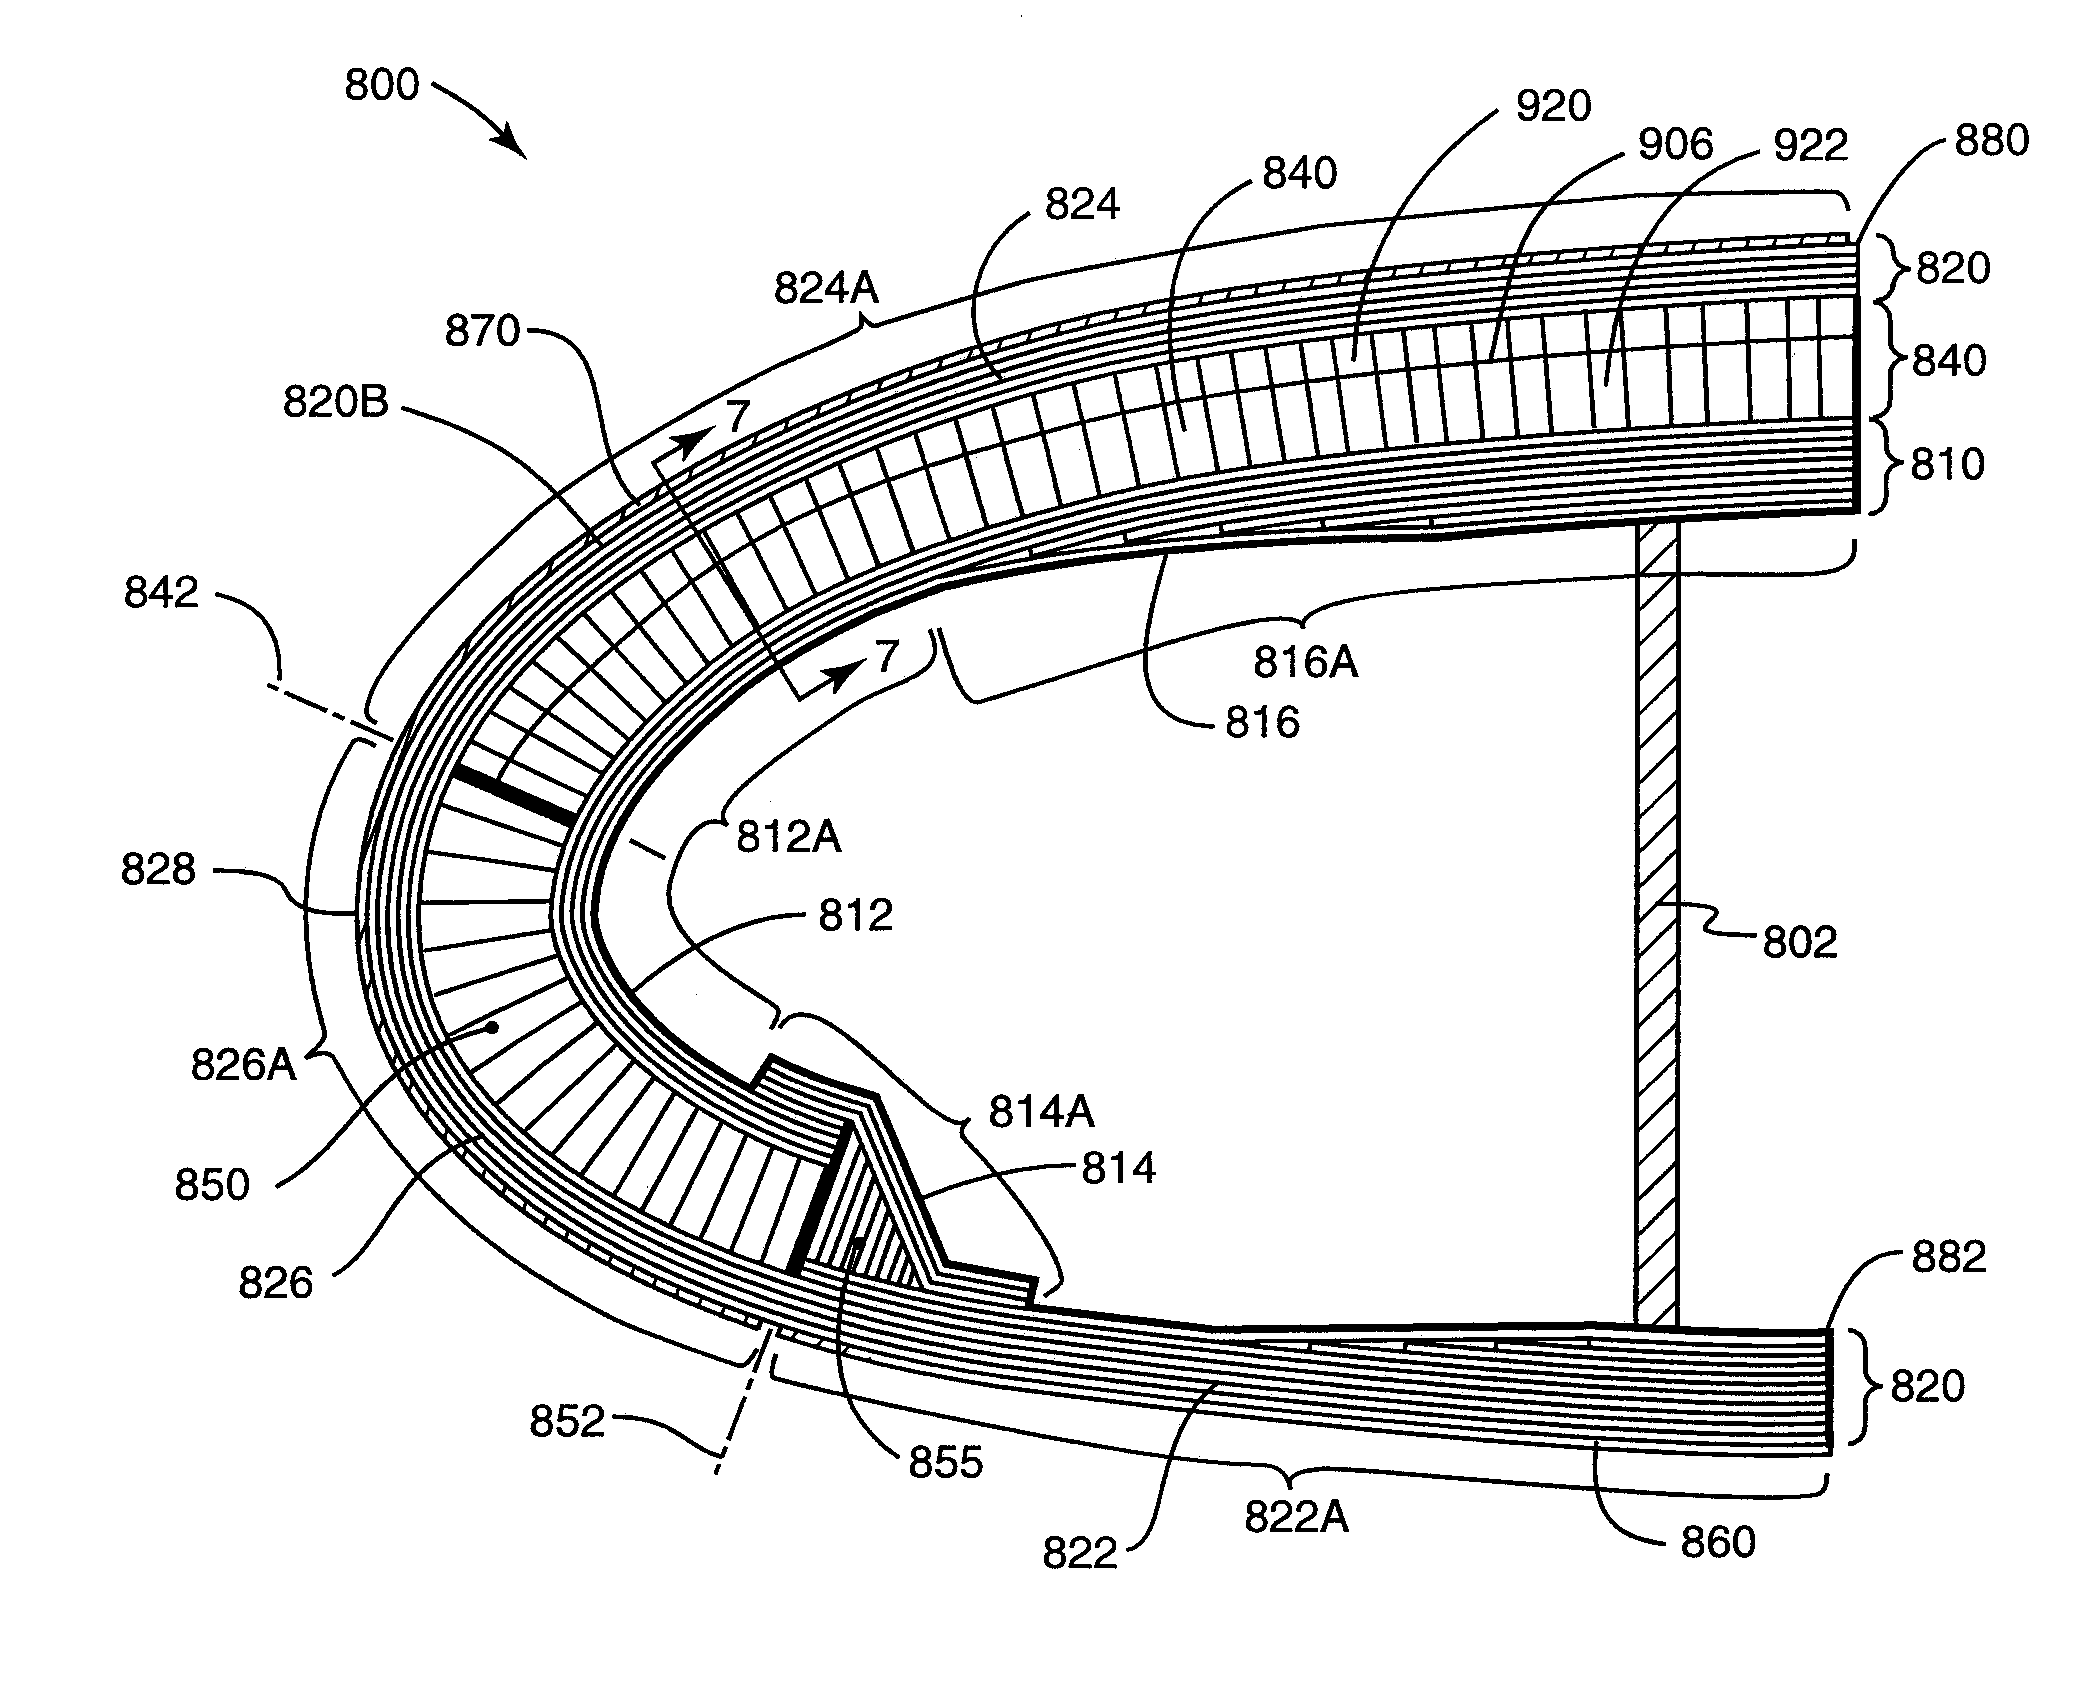 Acoustic nacelle inlet lip having composite construction and an integral electric ice protection heater disposed therein